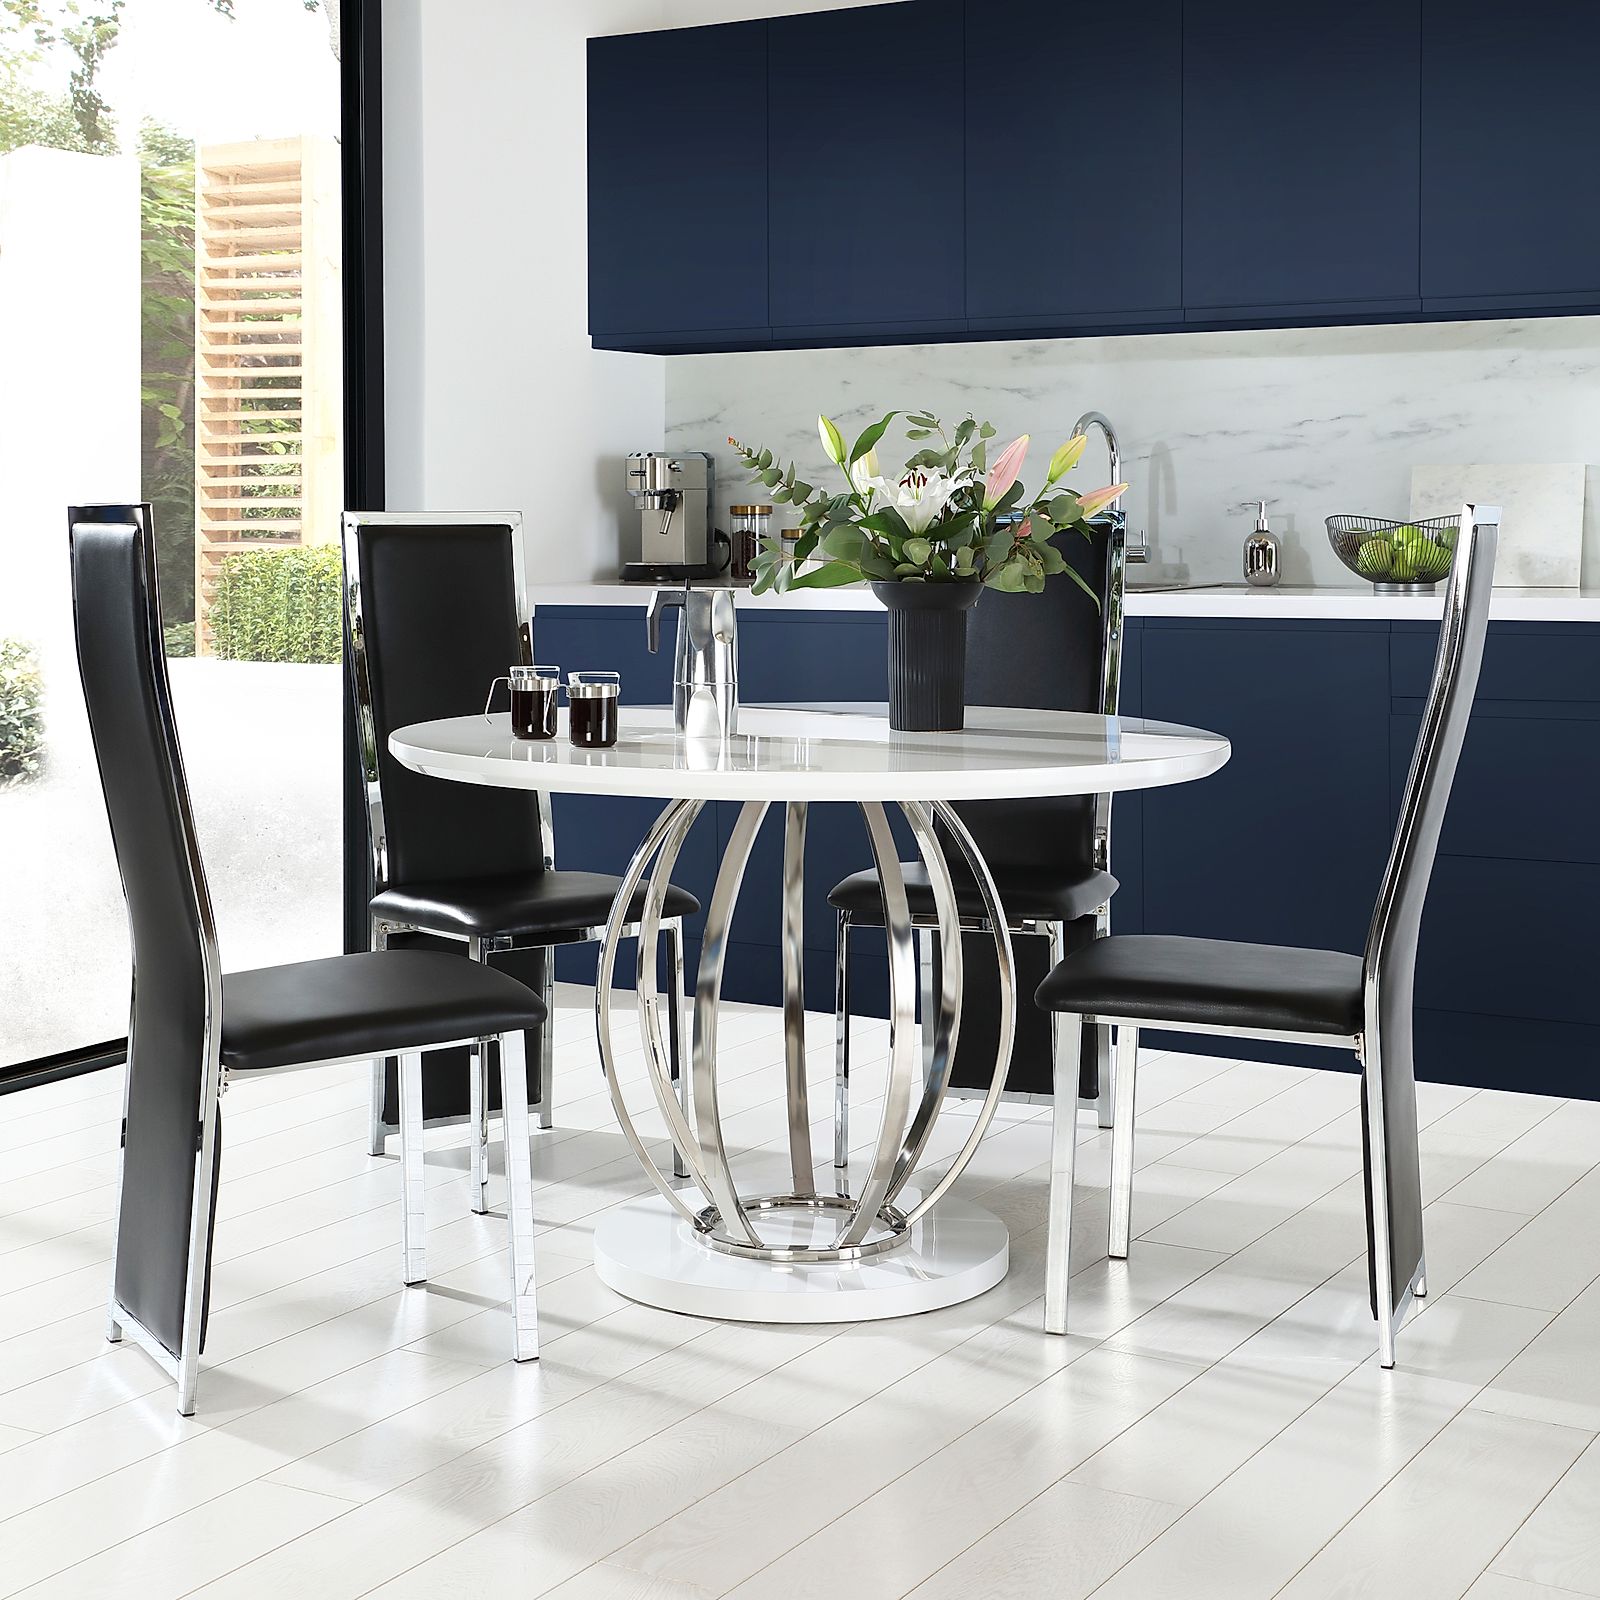 Savoy Round White High Gloss and Chrome Dining Table with ...